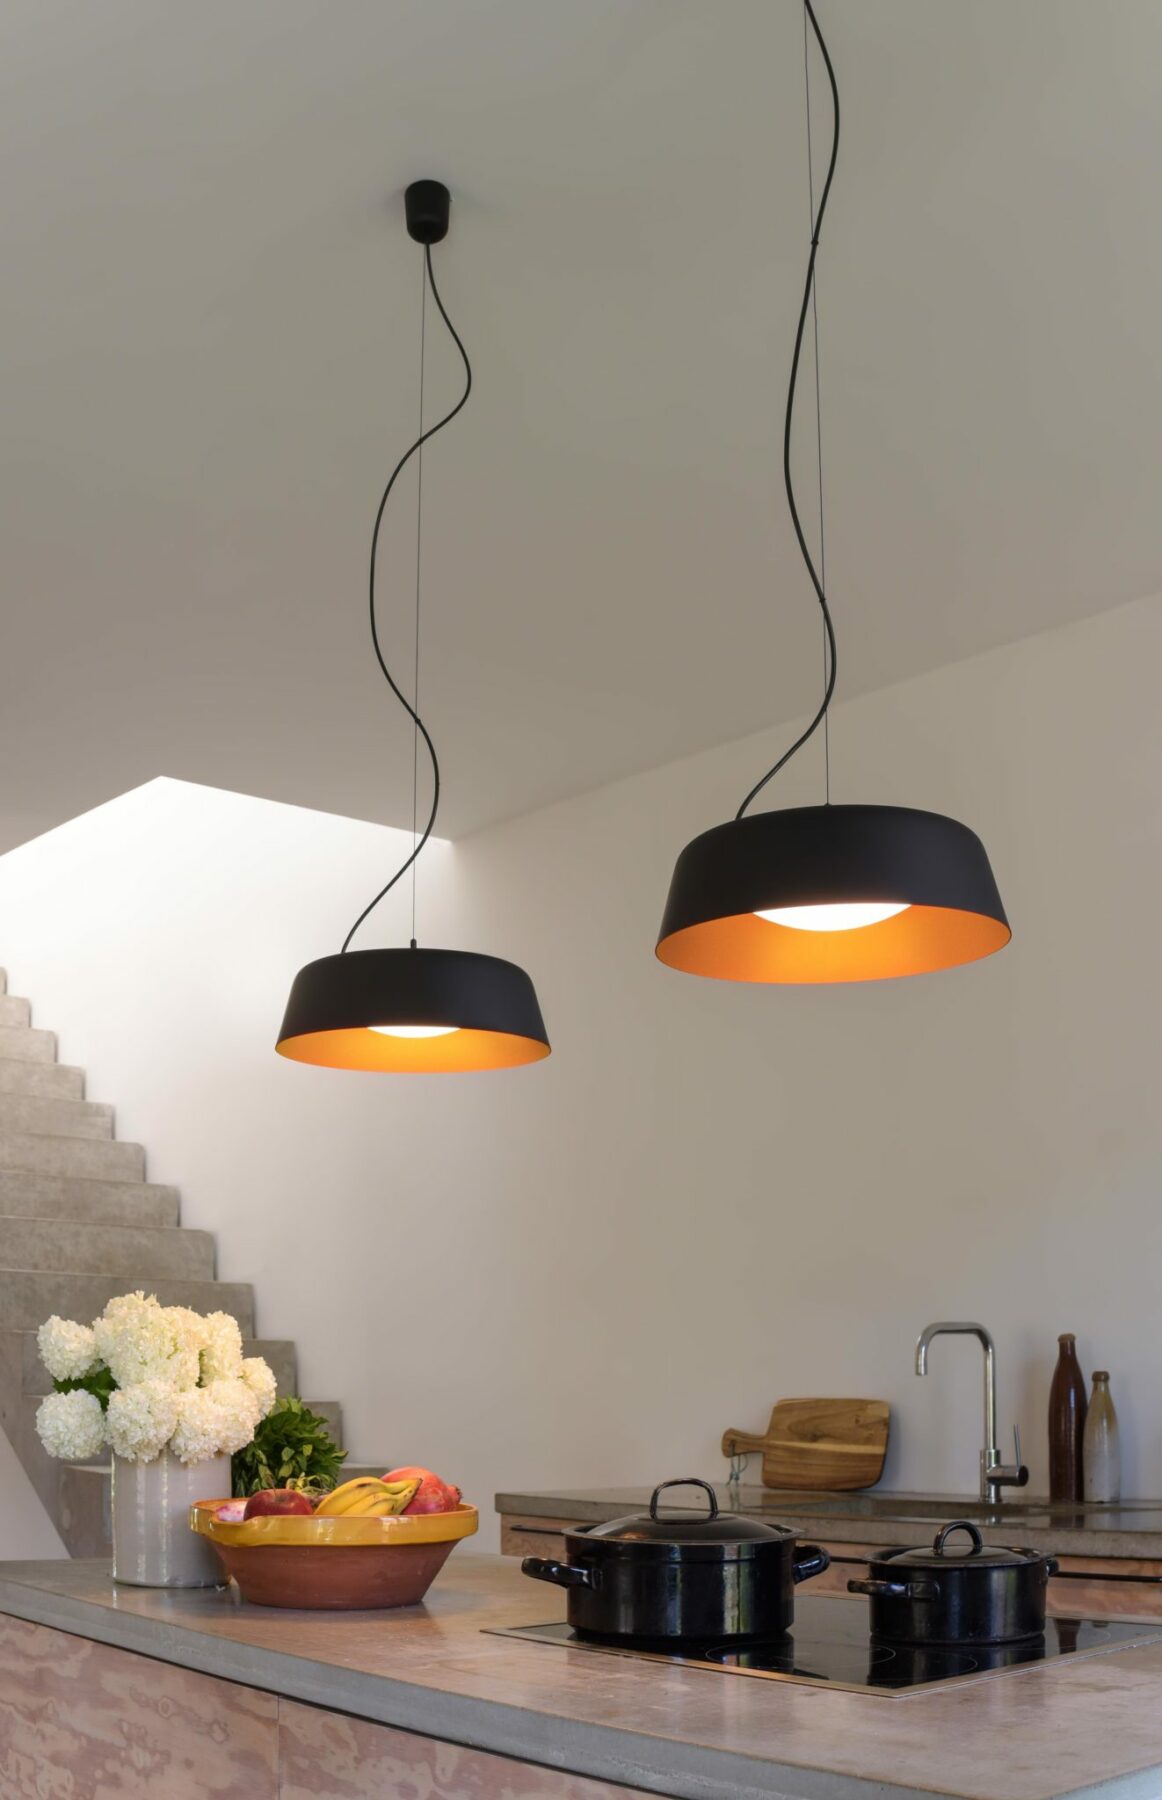 Bowl LED pendant luminaires in bi-colour over a modern kitchen counter.